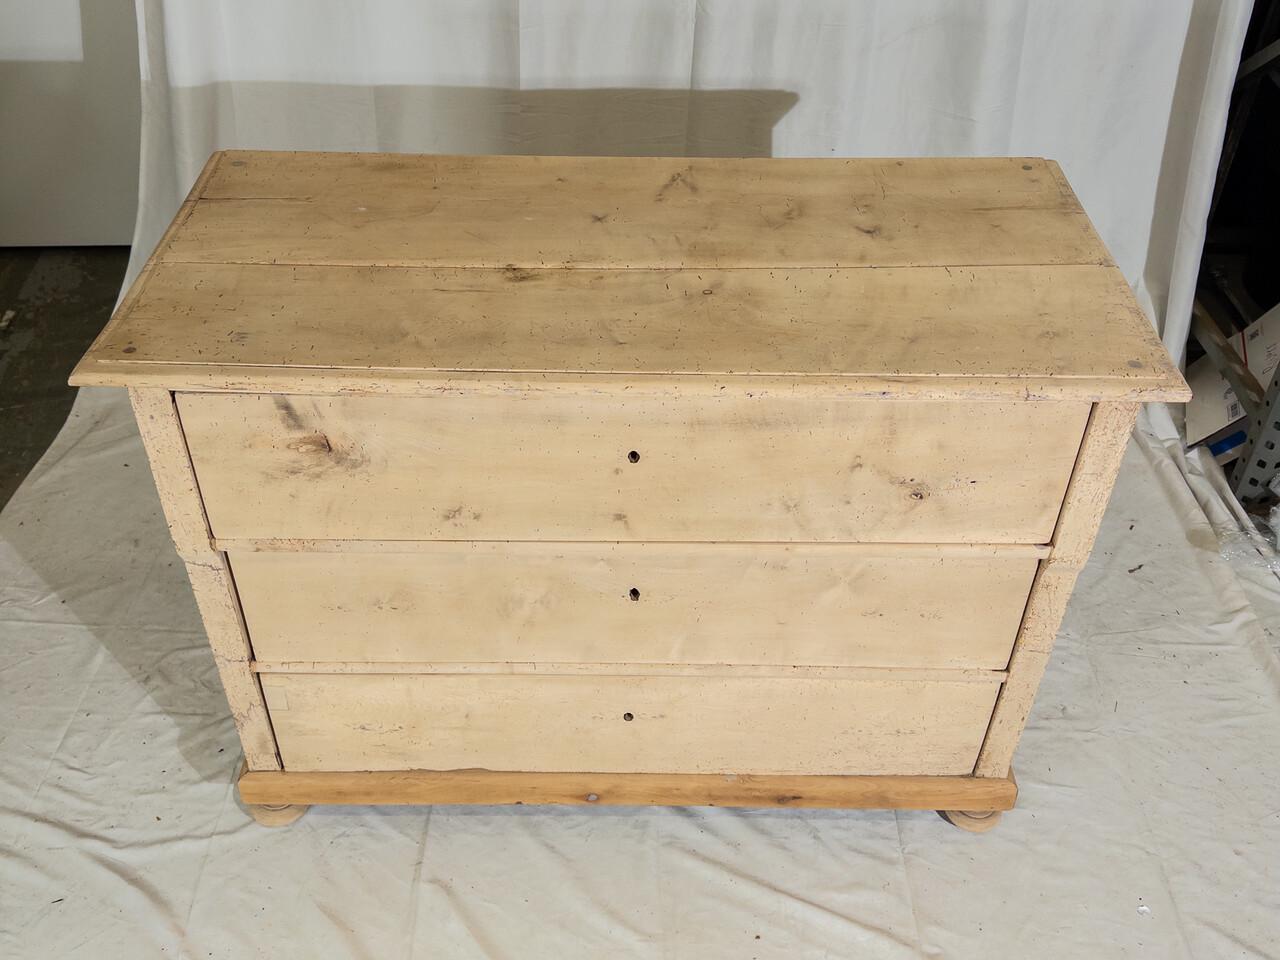 Transport your space to the rustic elegance of 19th-century France with this charming bleached pine chest. Each drawer tells a story of craftsmanship and history. The weathered finish adds character, echoing the passage of time with grace. With